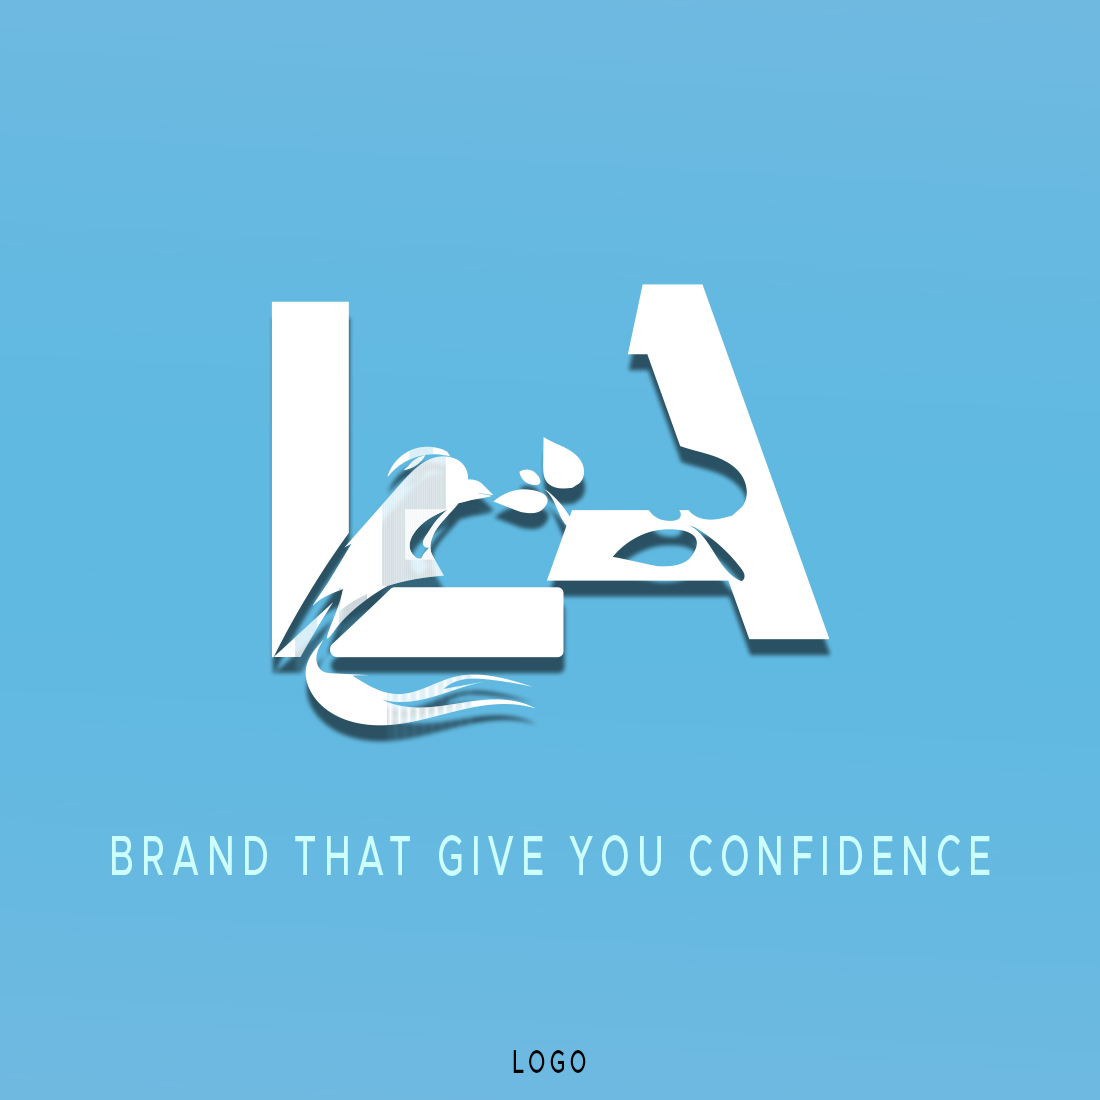 Blue and white logo with the words brand that give you confidence.